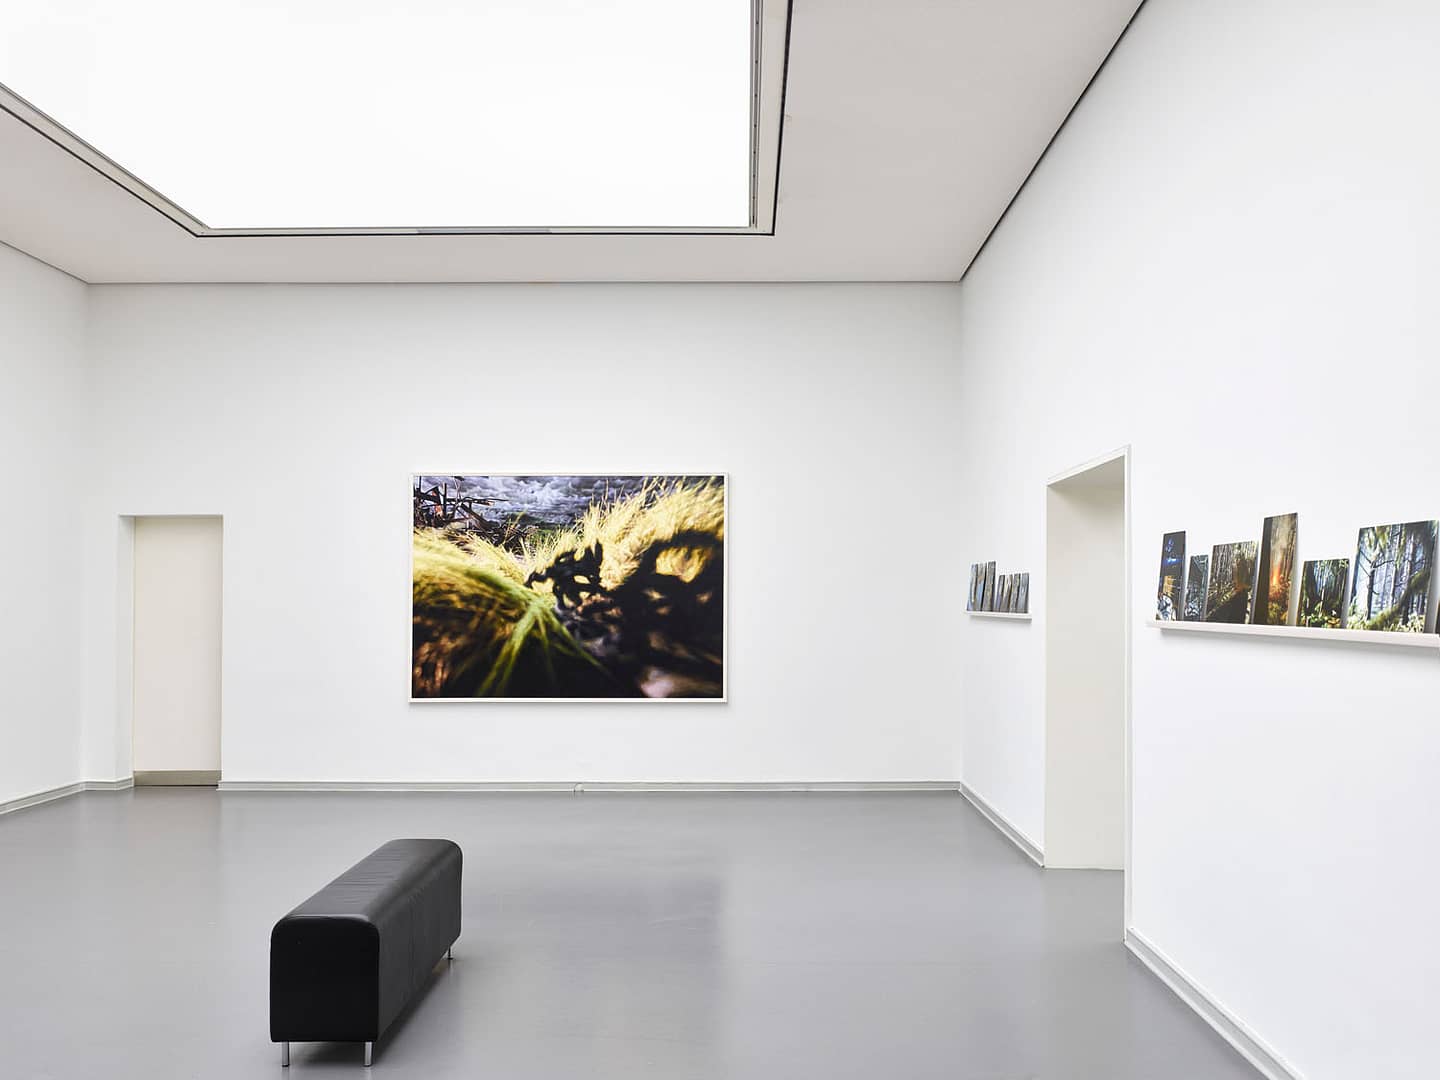 Exhibition view of Philipp Fröhlich's solo show Märchen at Von der Heydt Kunsthalle Barmen, produced by Kunst- und Museumsverein Wuppertal. The image shows various paintings based on popular fairy tales, hanging at the exhibition.